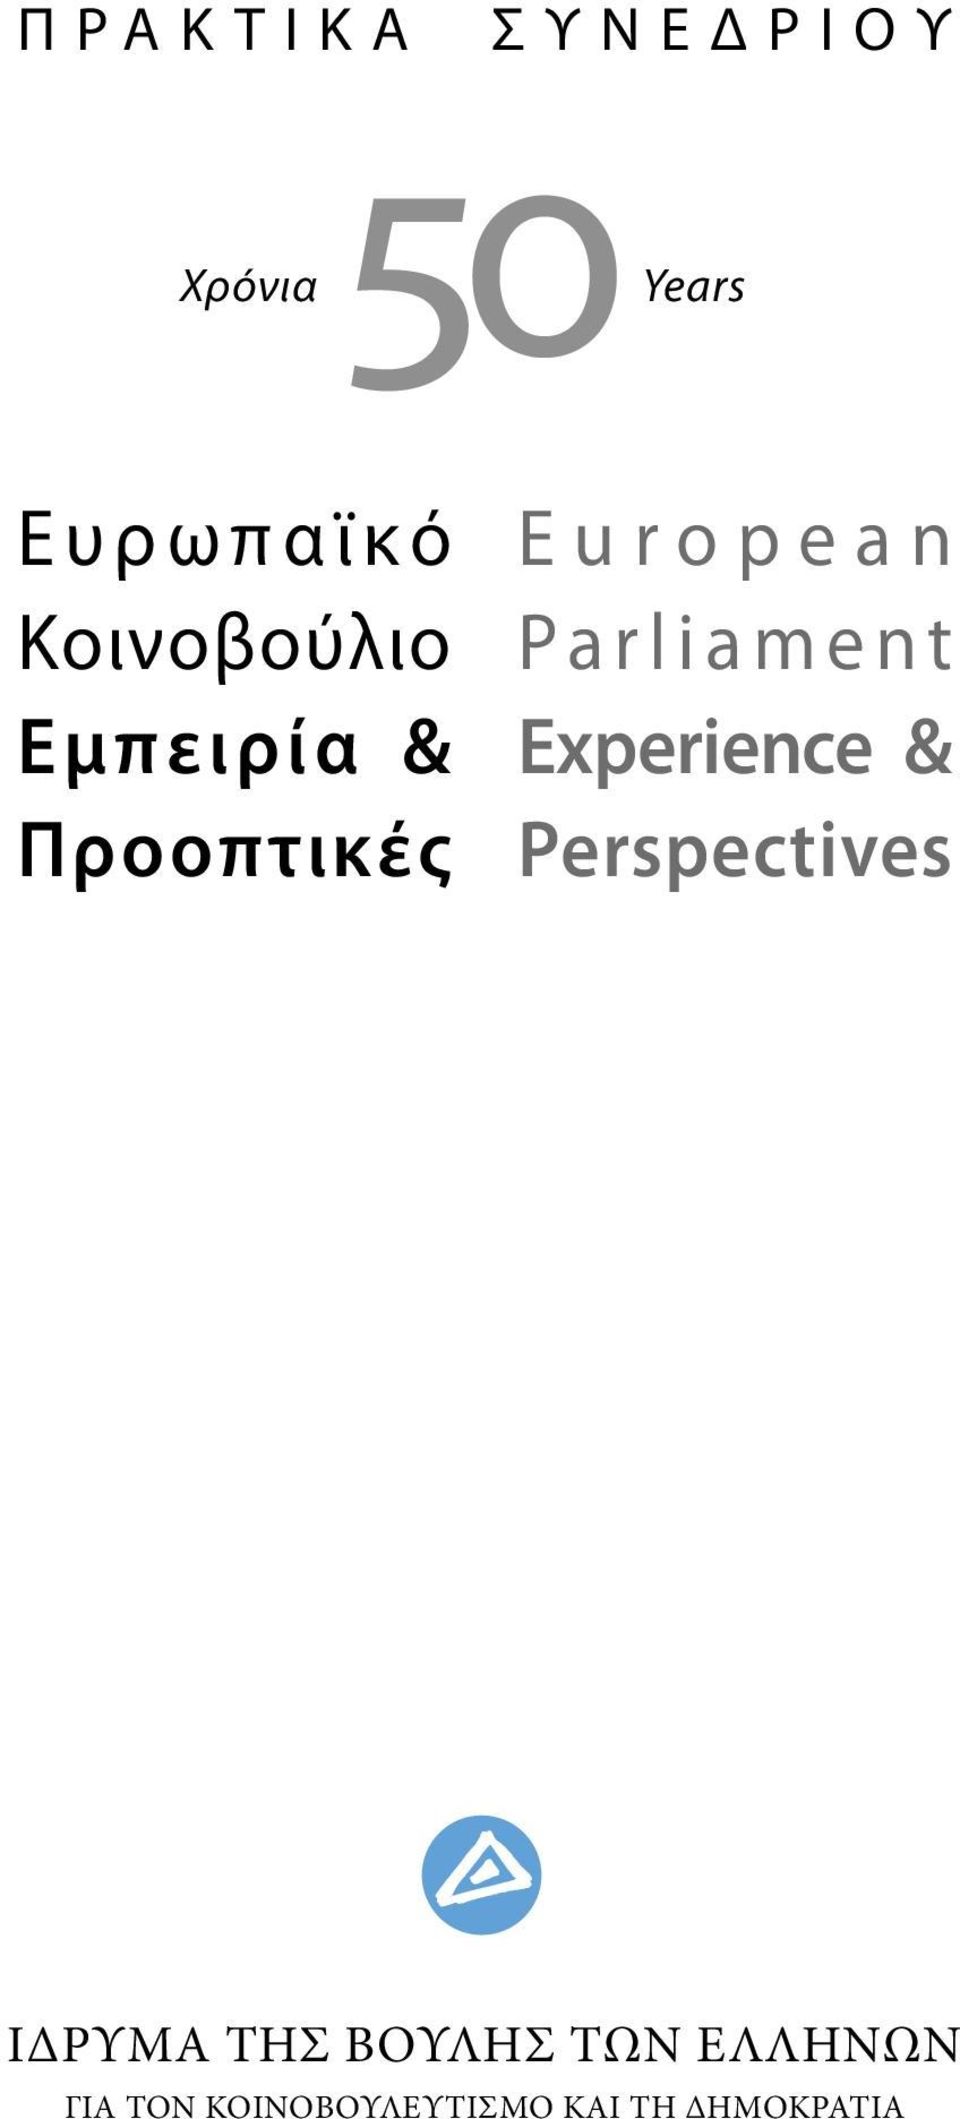 Parliament Experience & Perspectives ΙΔΡΥΜΑ ΤΗΣ